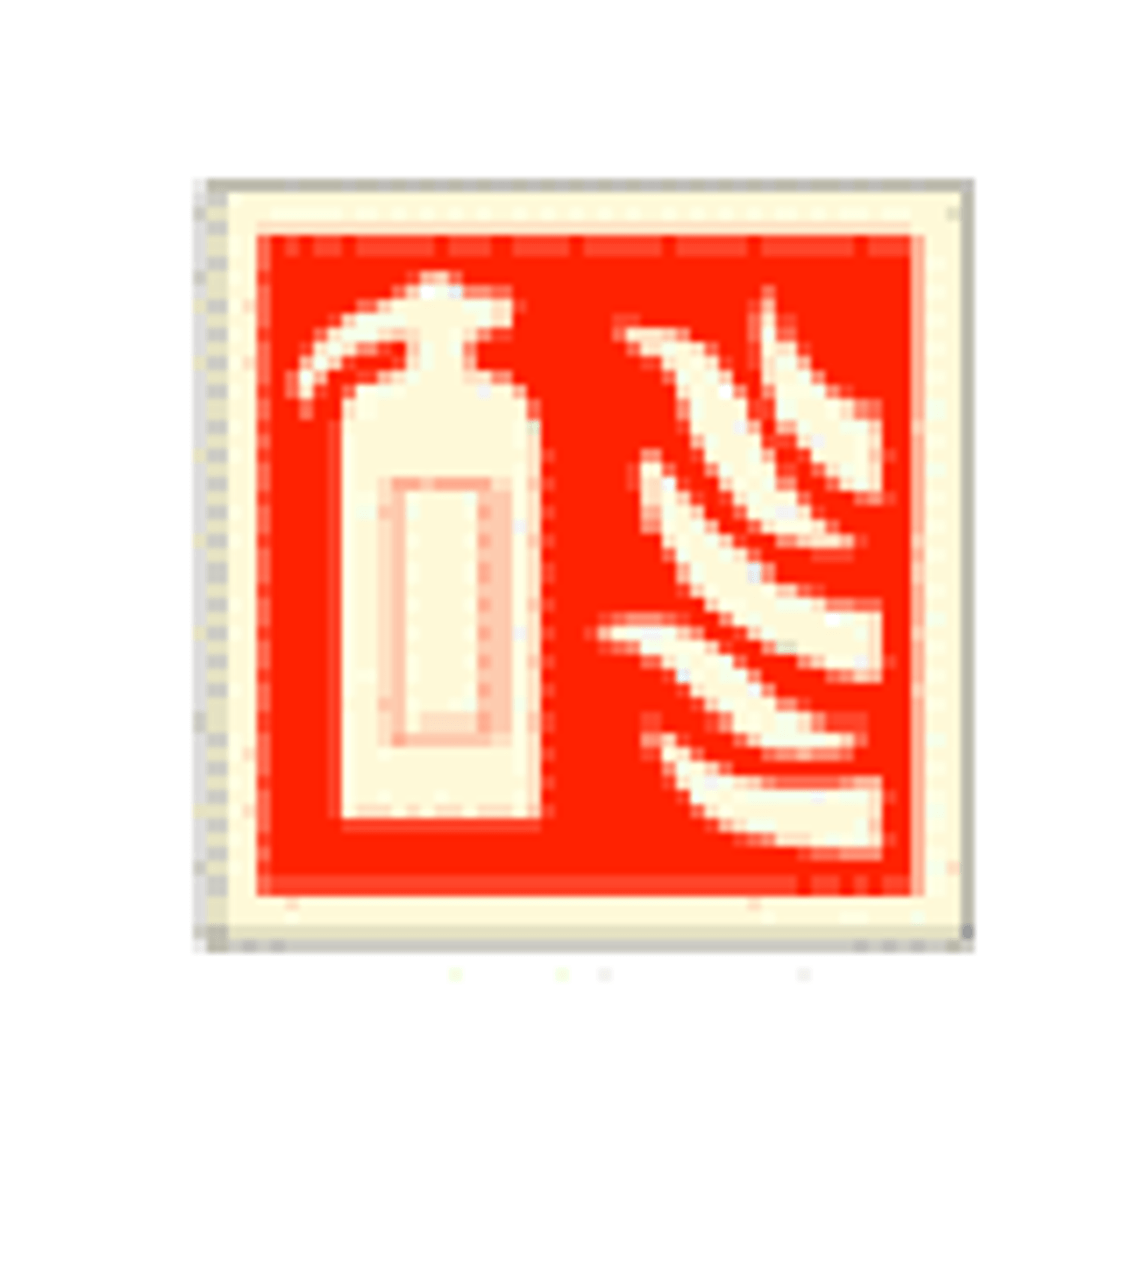 IMPA 336100 Self adh. Fire equipment sign - Fire extinguisher